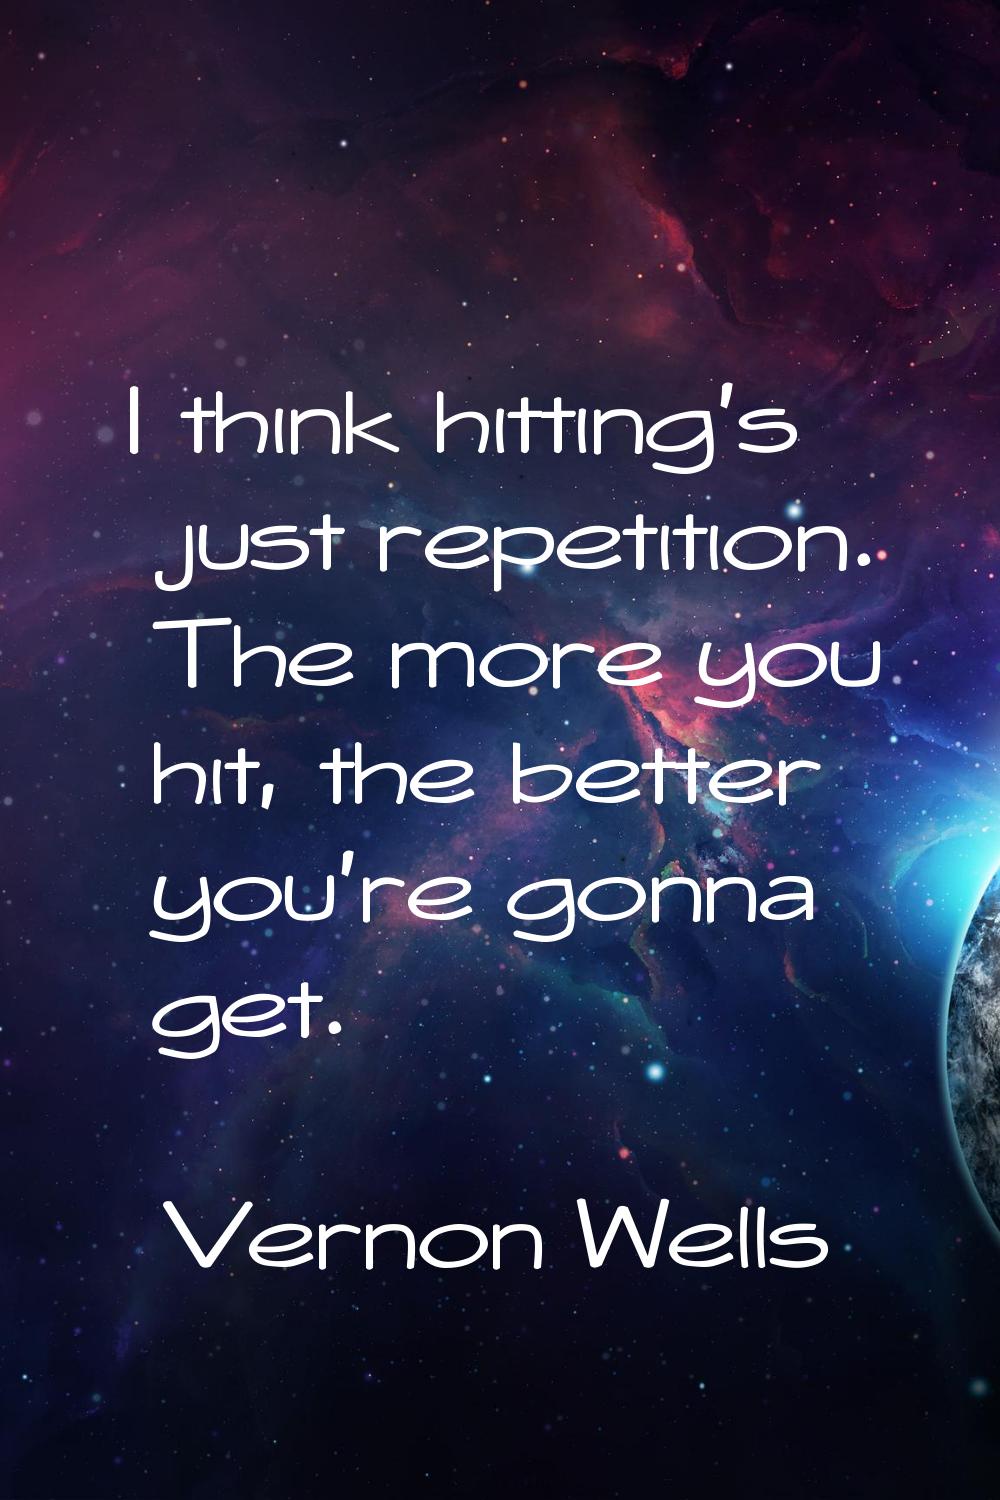 I think hitting's just repetition. The more you hit, the better you're gonna get.